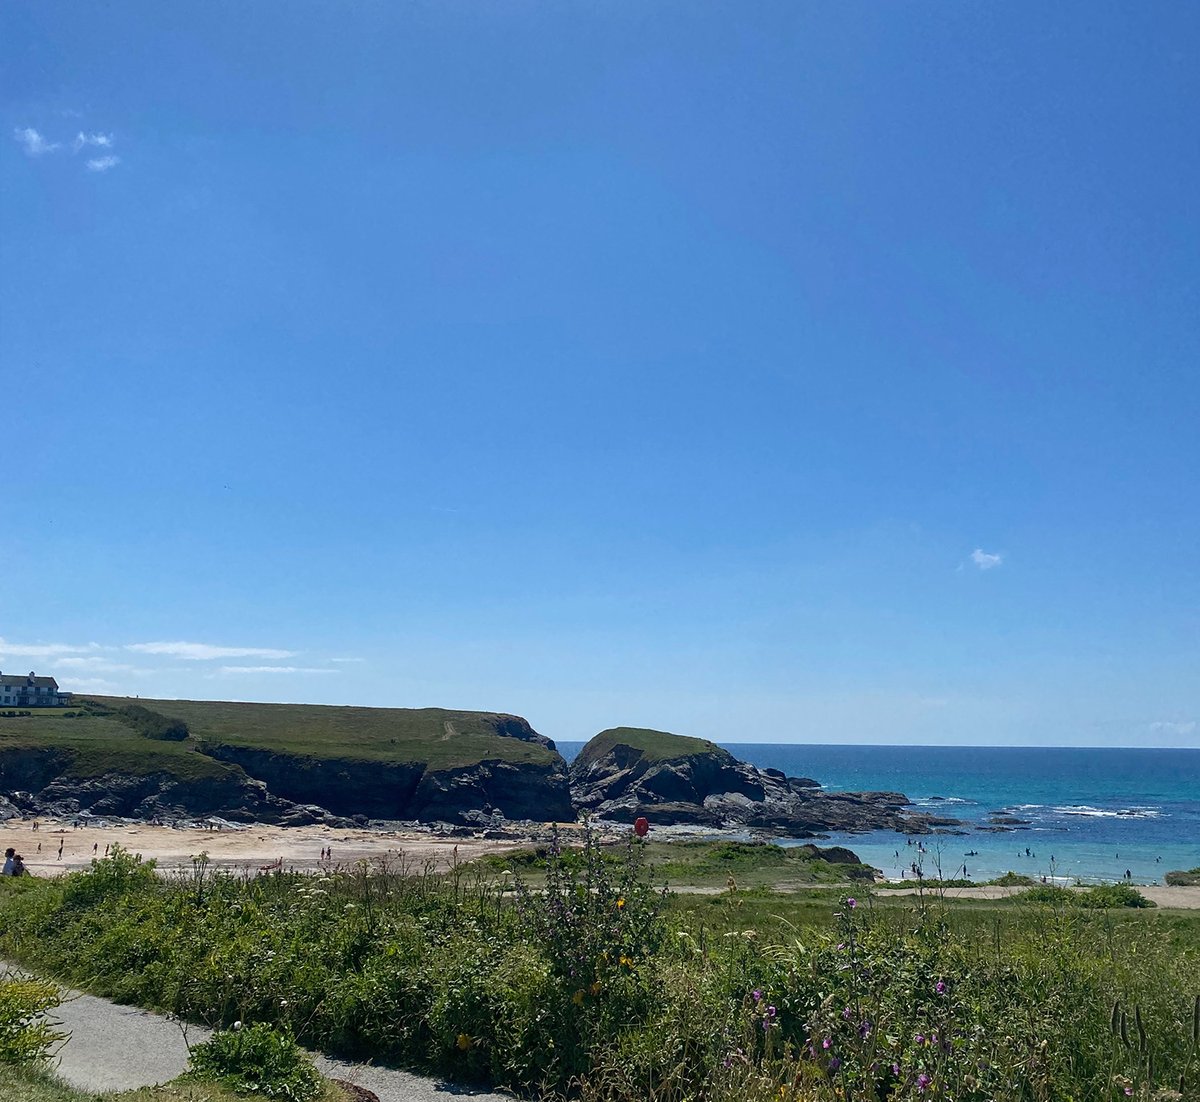 What a place to end the days cycling

cornwallbikehire.co.uk

#cornwallbikehire #electricbikehire #cycling #cornwall #cyclecornwall #bikehire #discover #ride #hire #delivered #view